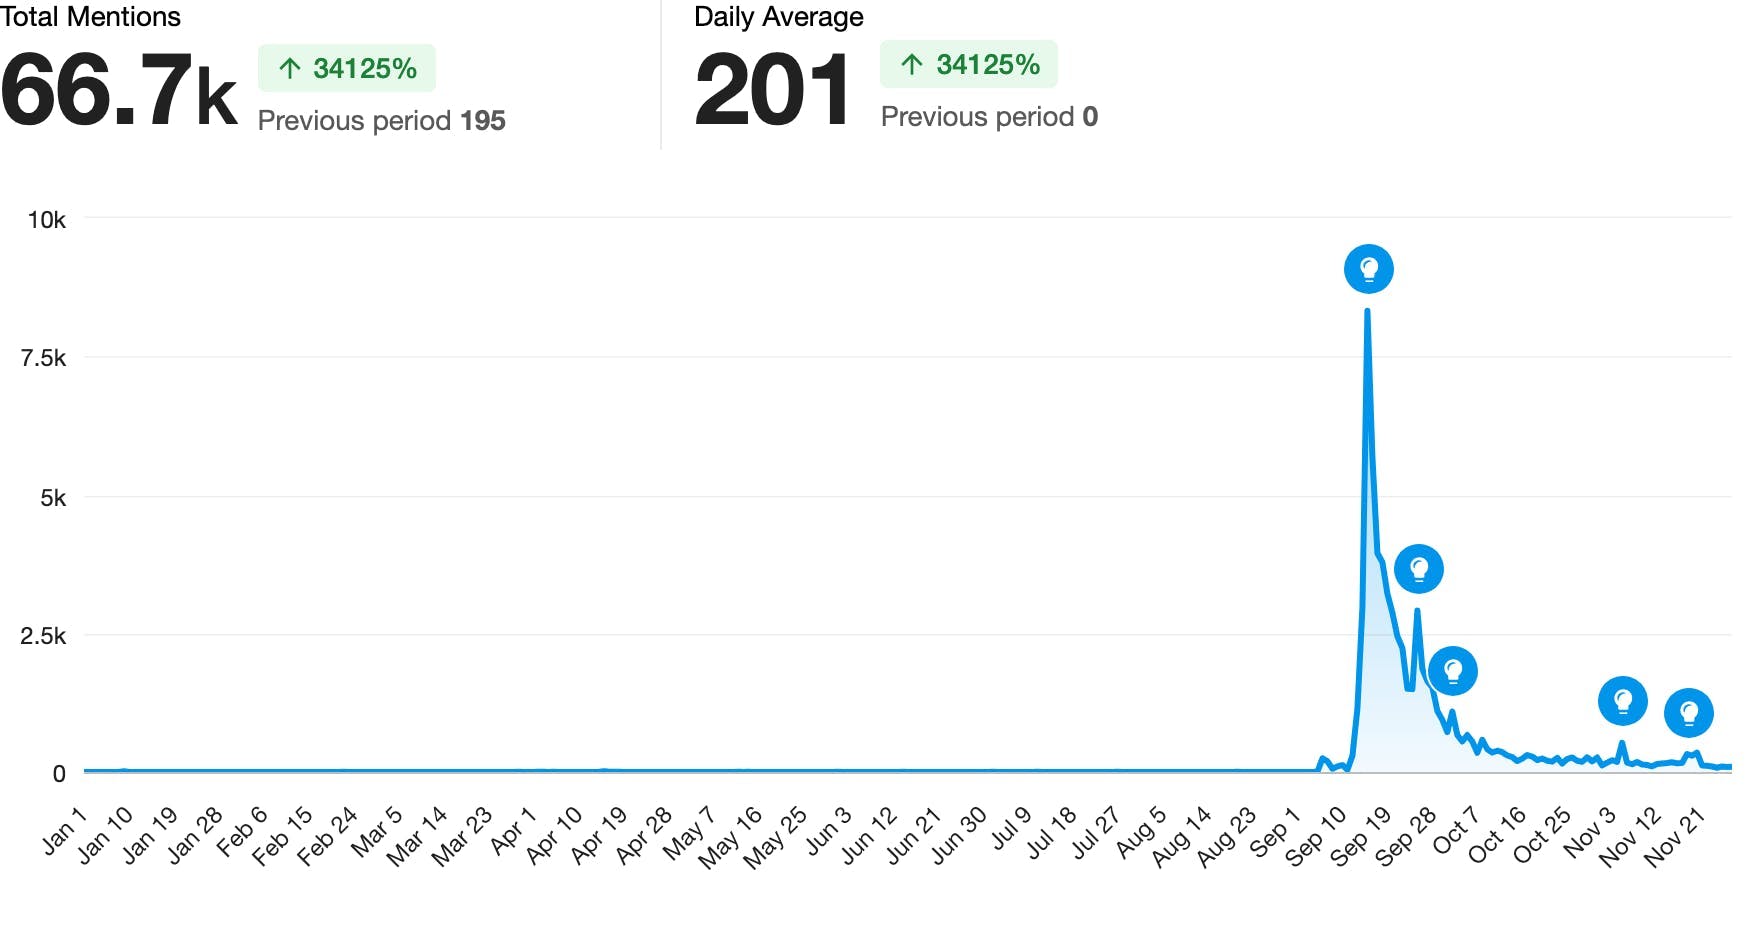 A chart showing mentions of the "Roman Empire" trend over time, with 66,700 total mentions at an average of 201 per day.